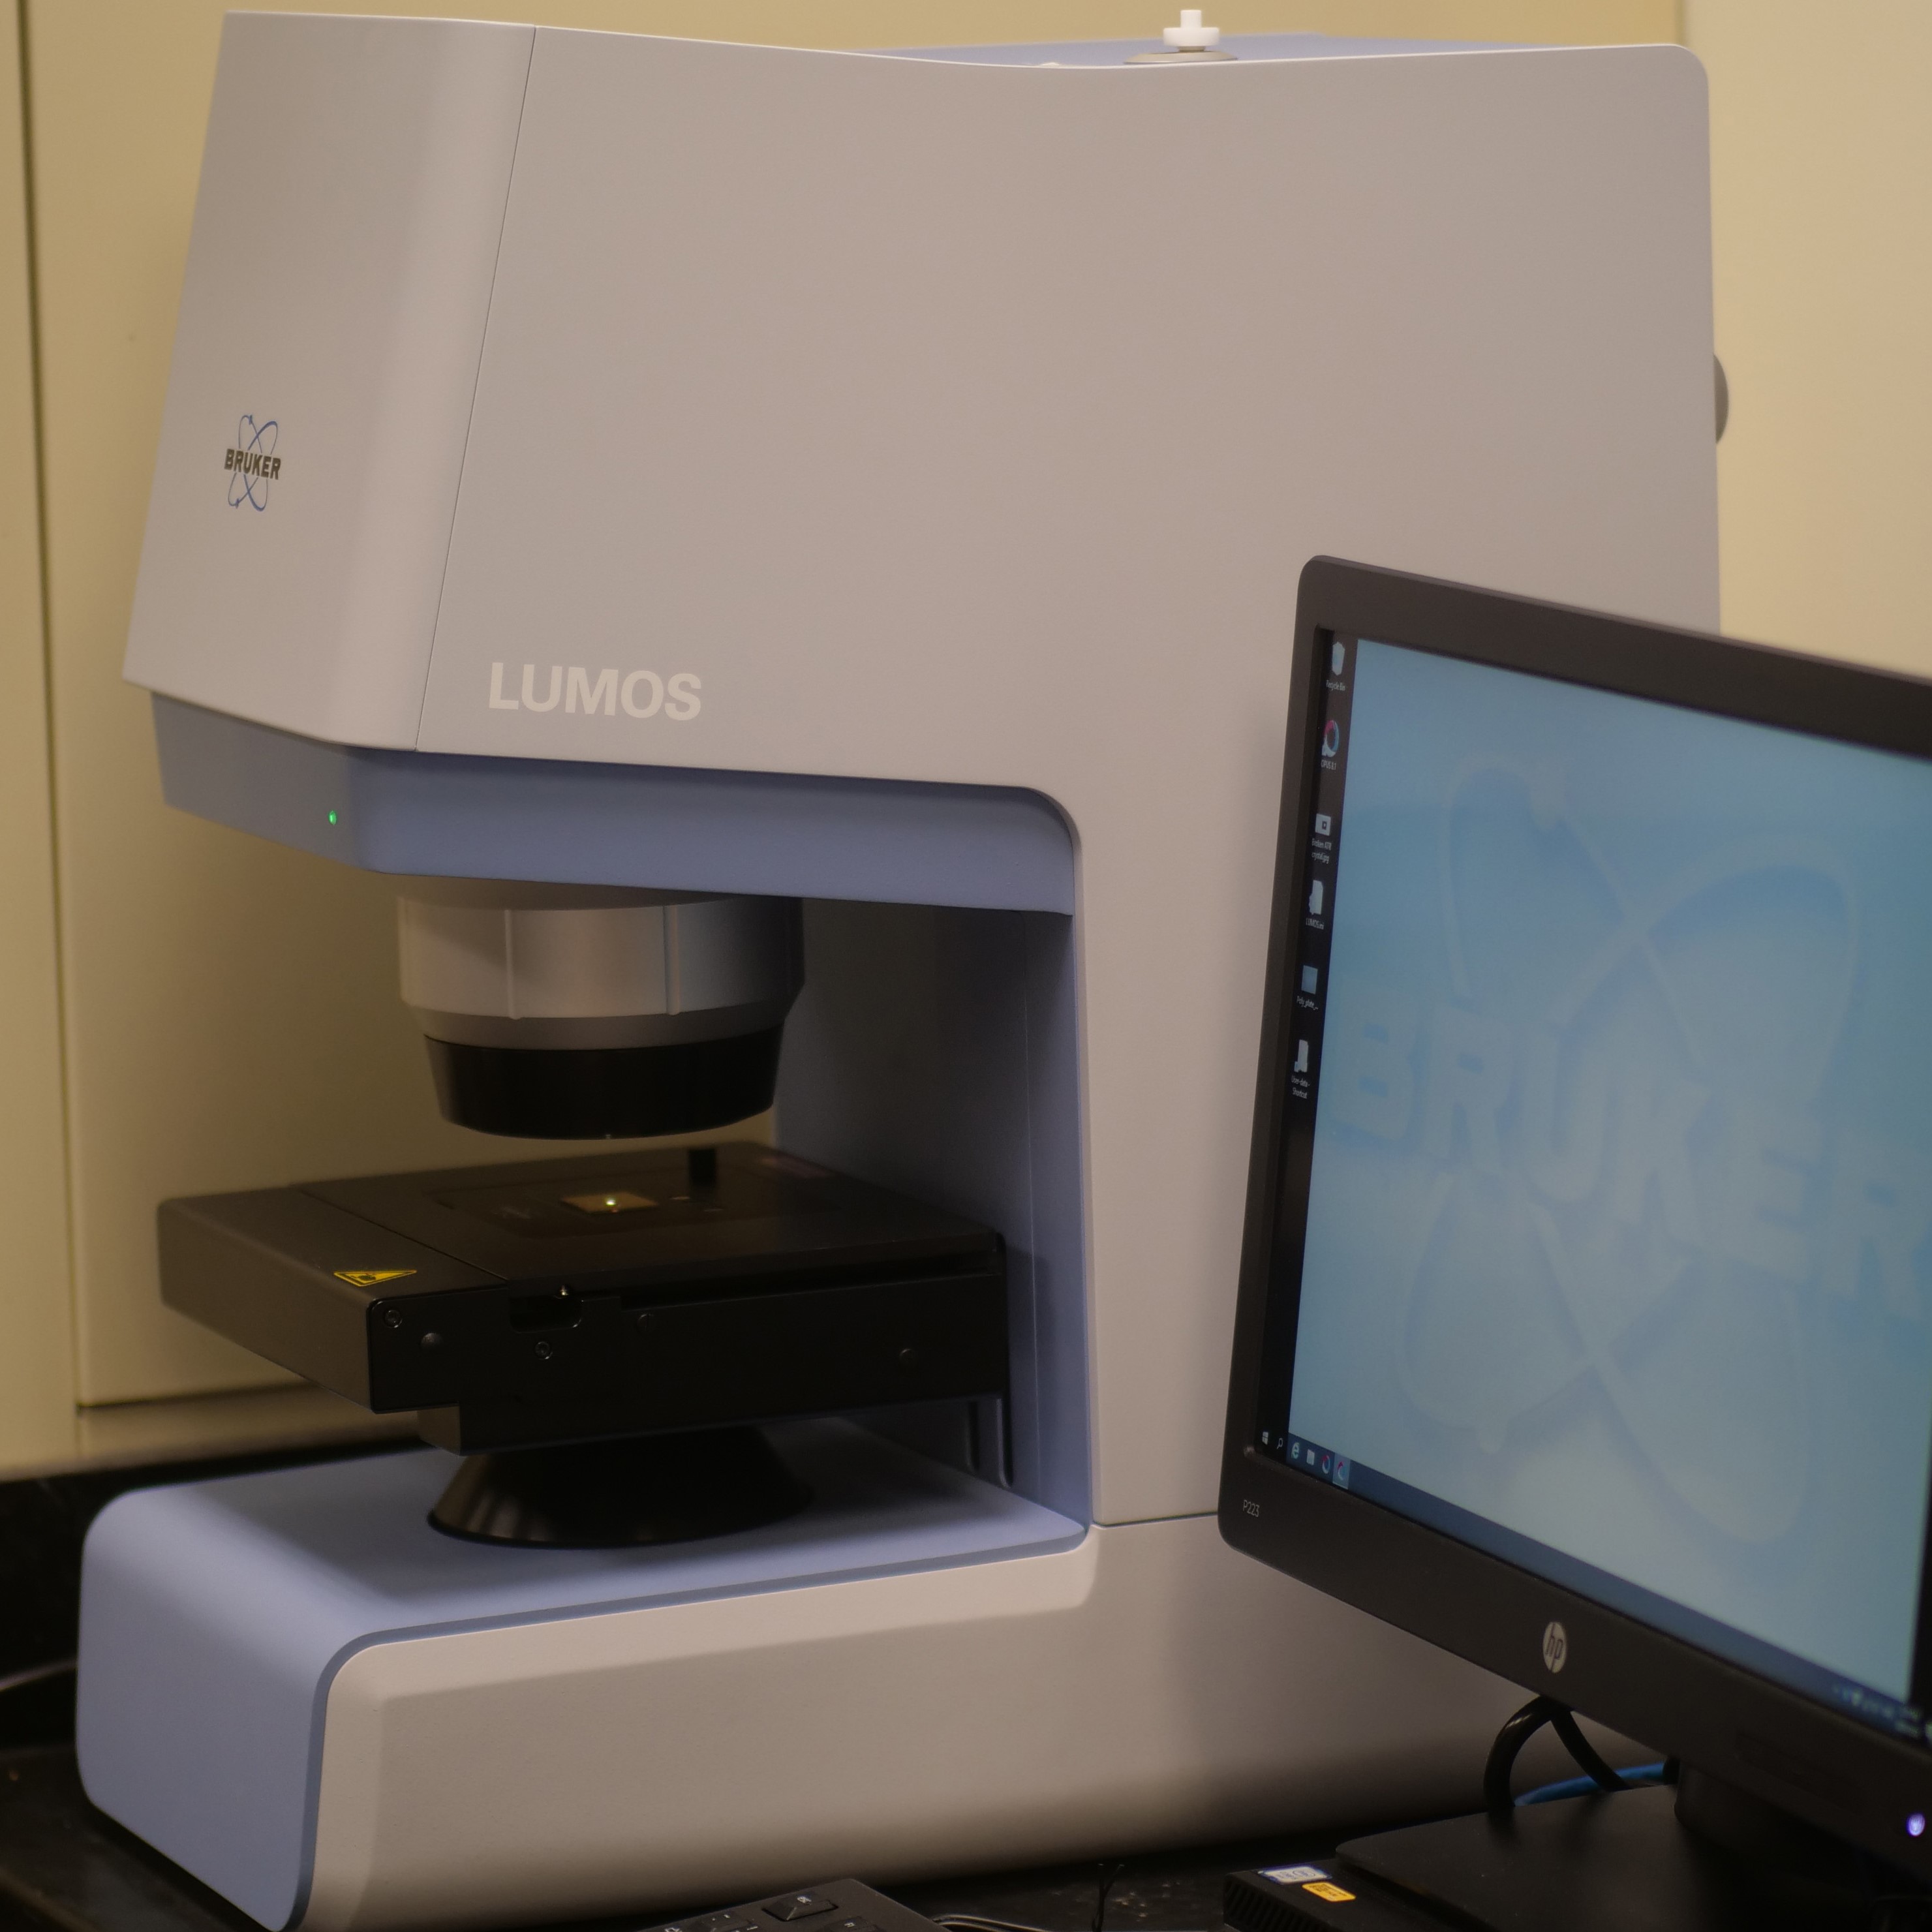 The LUMOS FTIR Microscope in the Keck Facility of the NUANCE Center